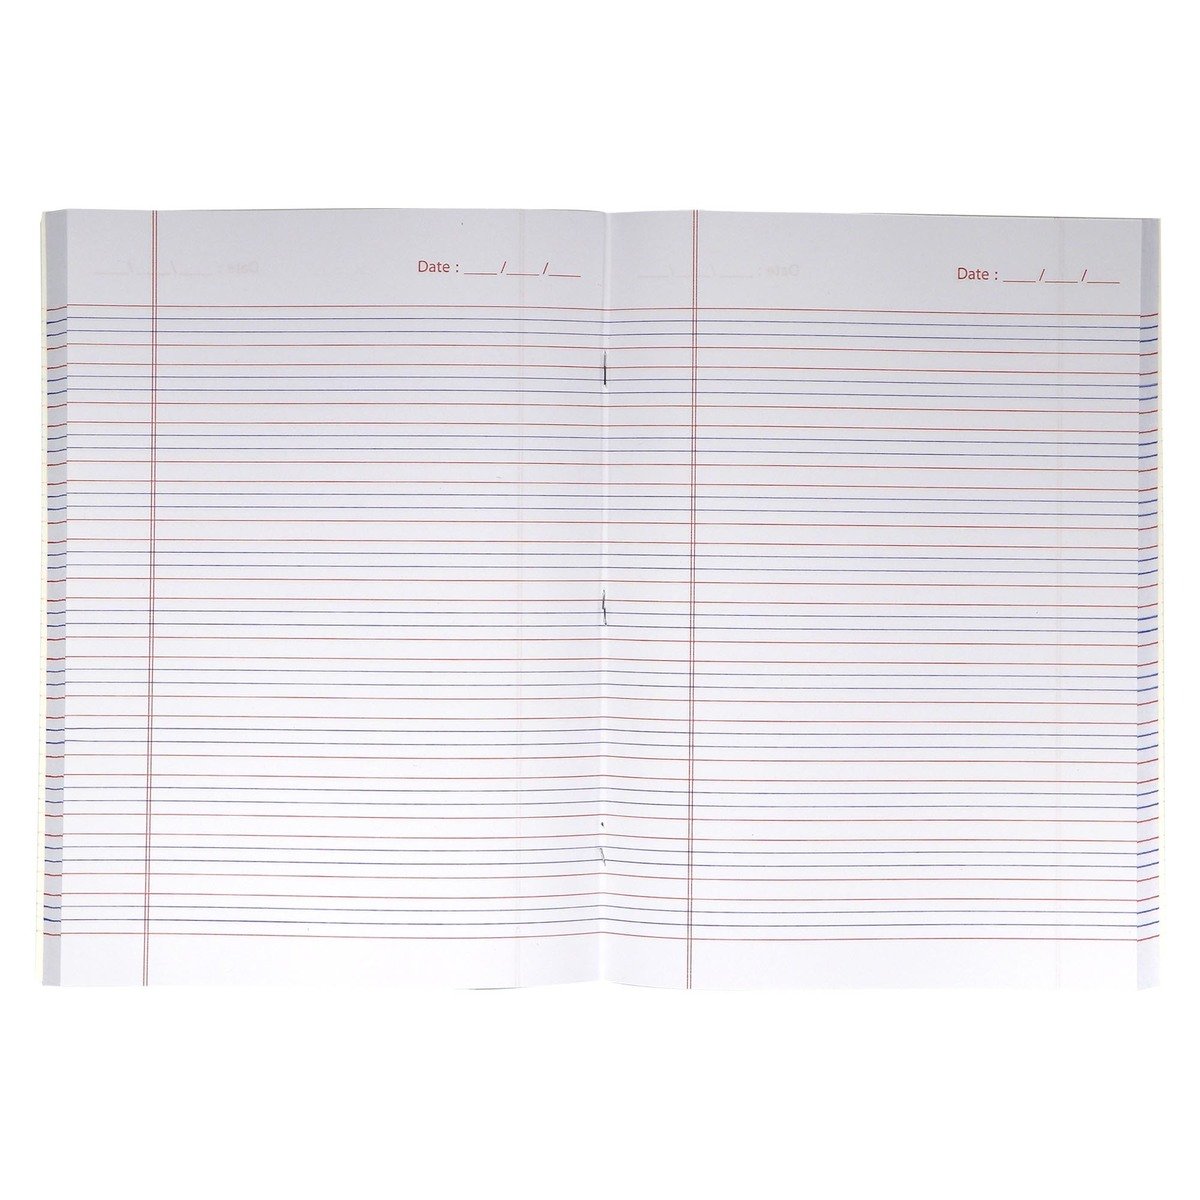 Children 4 Line Notebook: English Notebook With 4 Lines : Four Line  Notebook For Kids Handwriting : 200 Pages